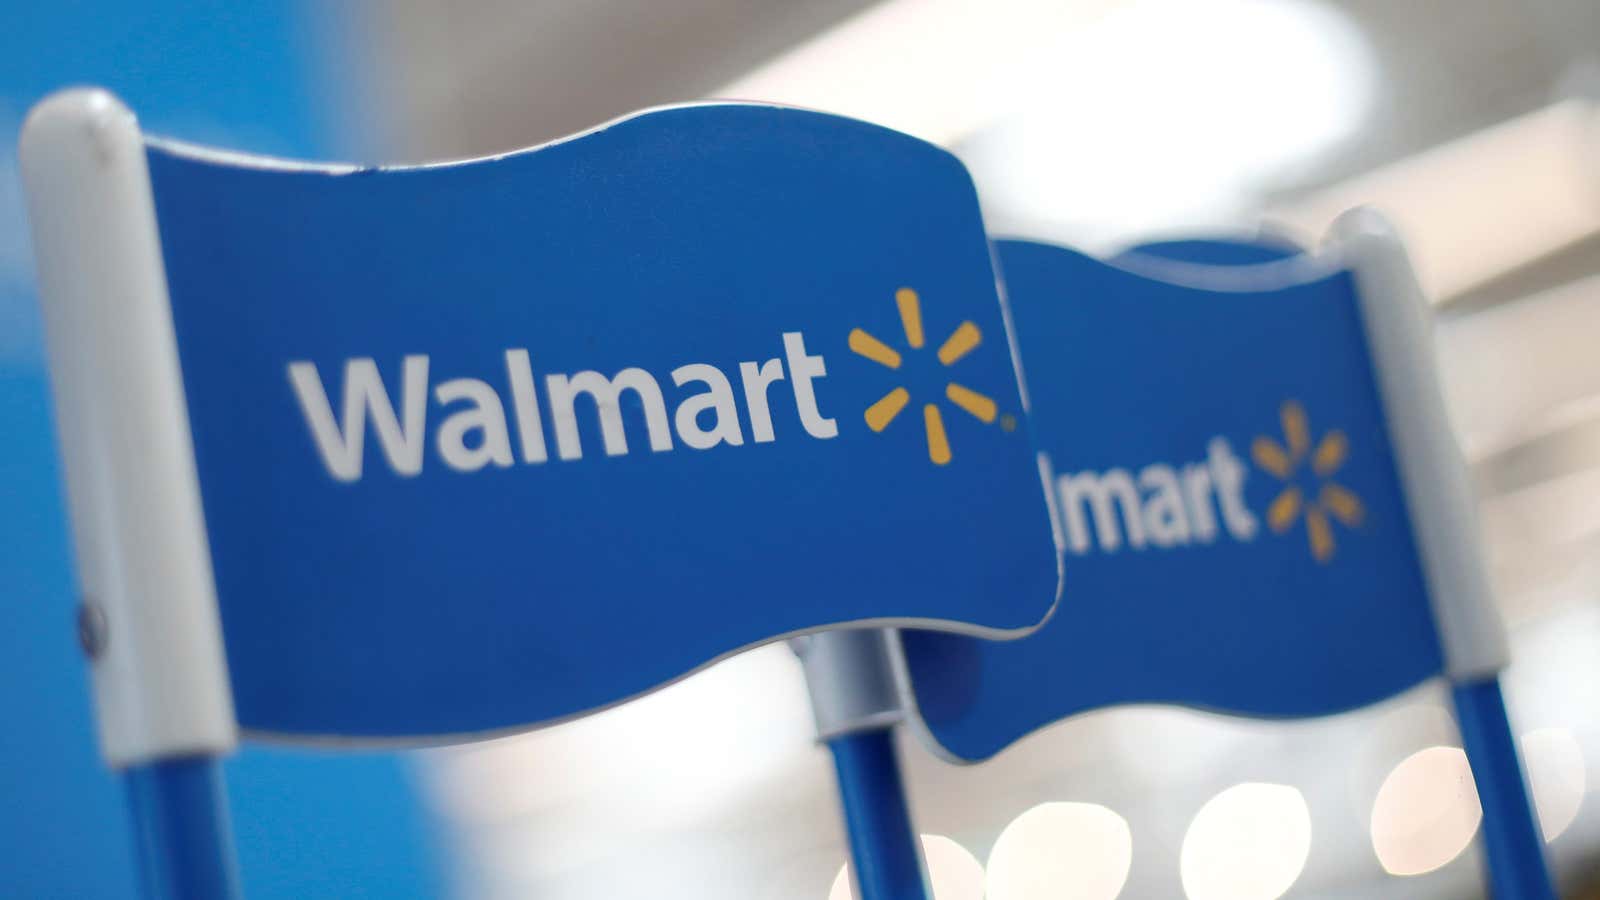 Mexico is one market where Walmart sees a golden opportunity for growth.